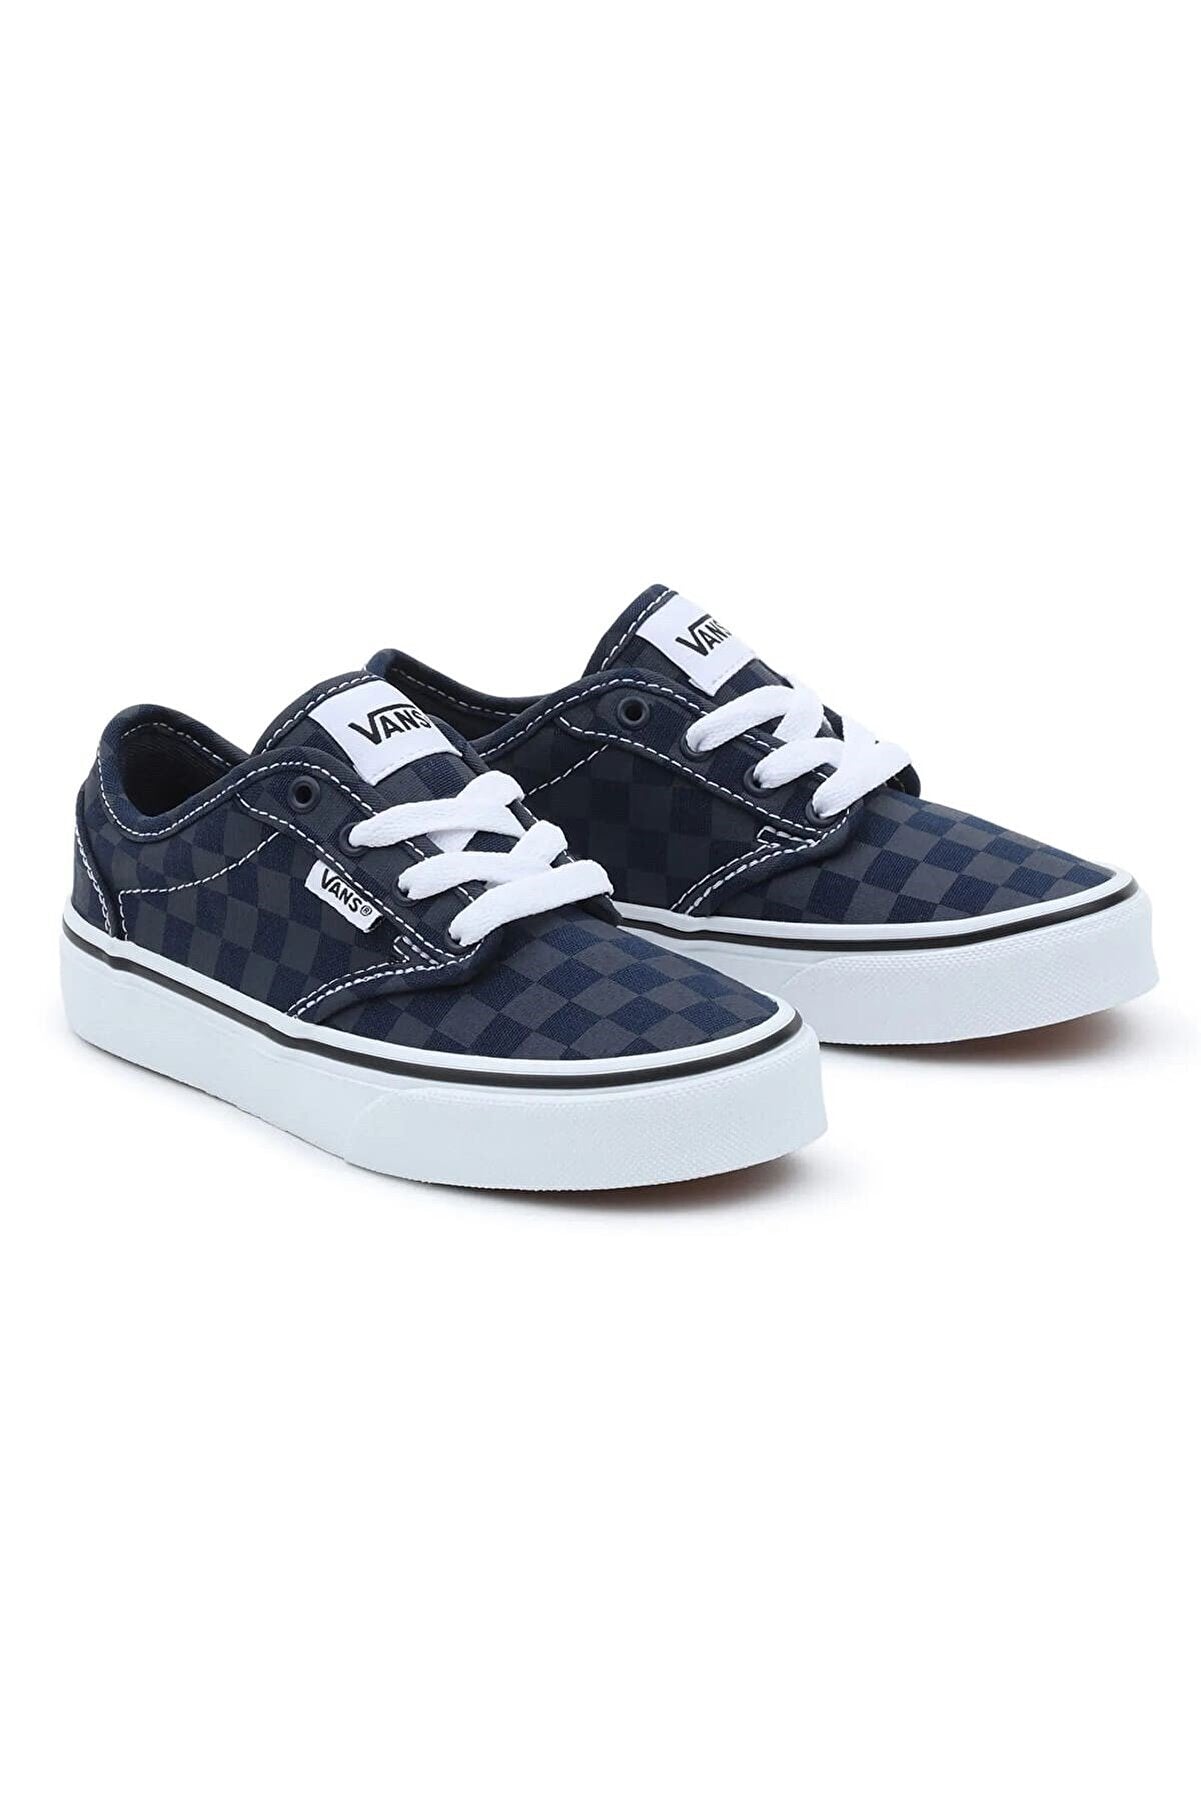 Youths Atwood Dress Blues Tonal Check Trainer